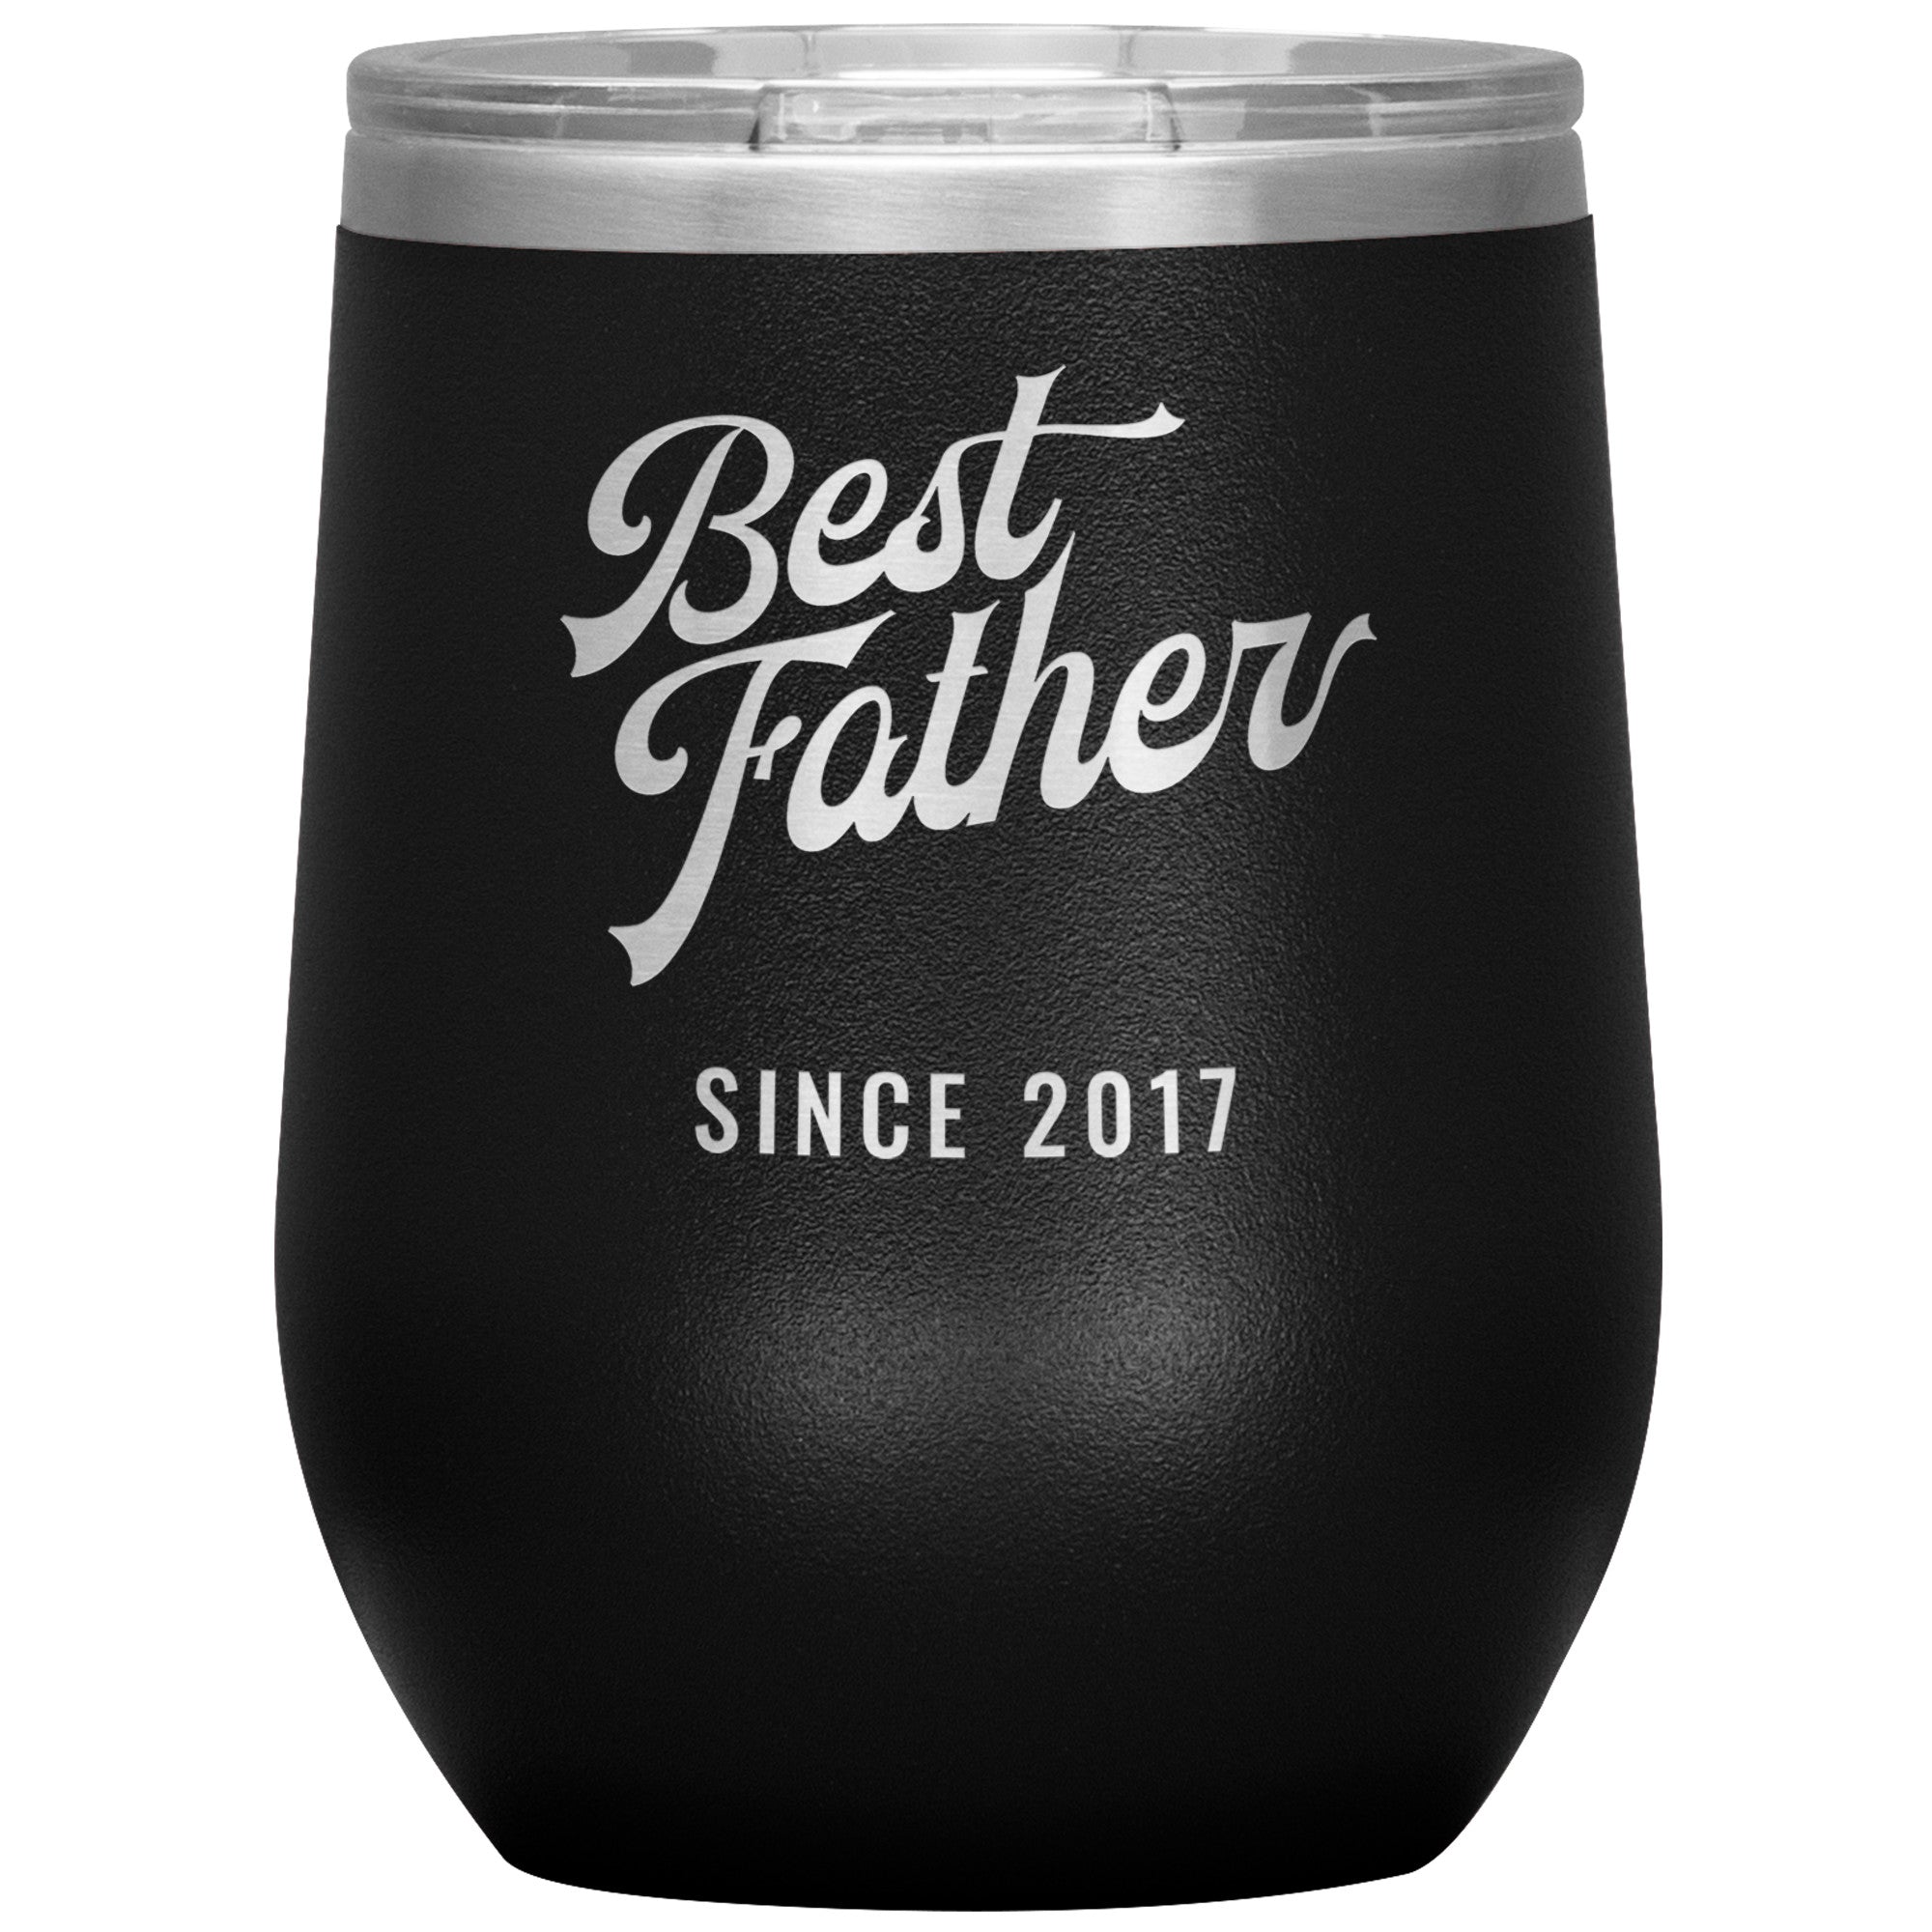 Best Father Since 2017 - 12oz Insulated Wine Tumbler